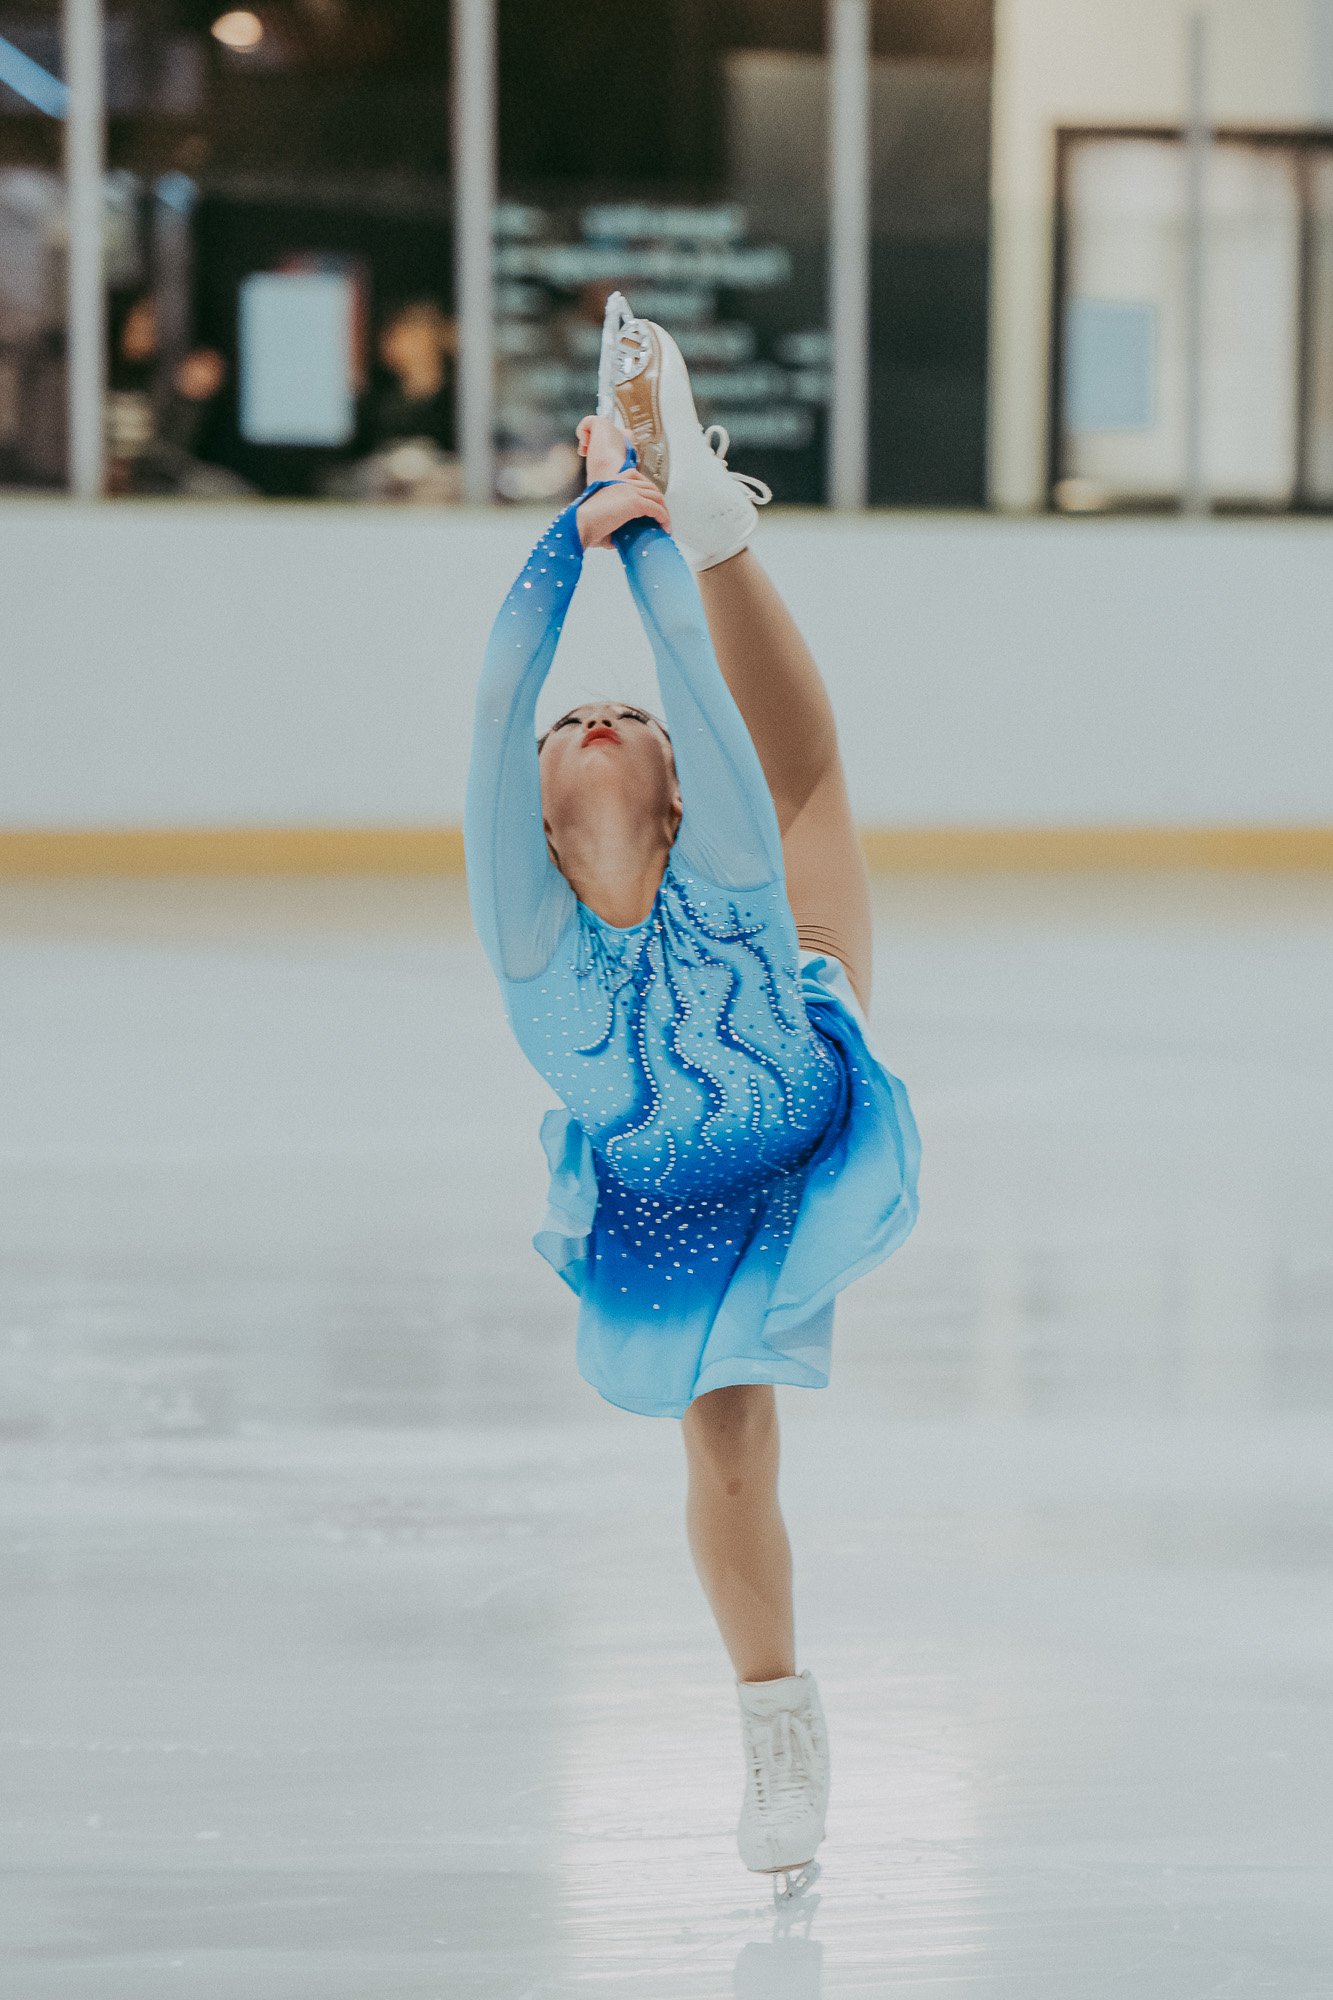 Nationals-ice skating_by_Levien-16.jpg